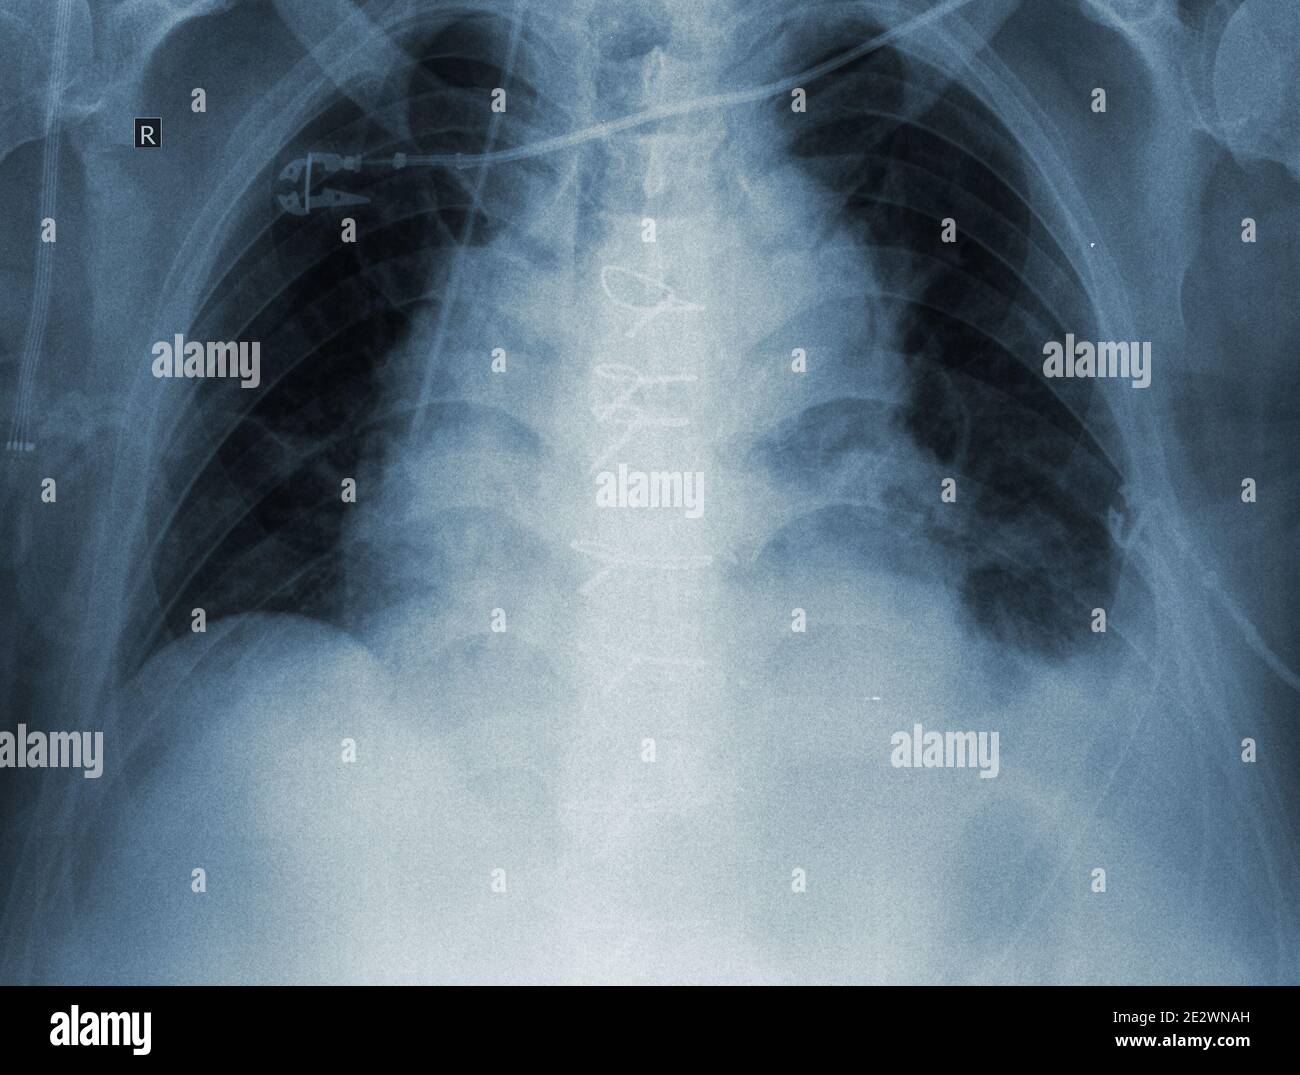 R-control image of patient lungs. Stock Photo